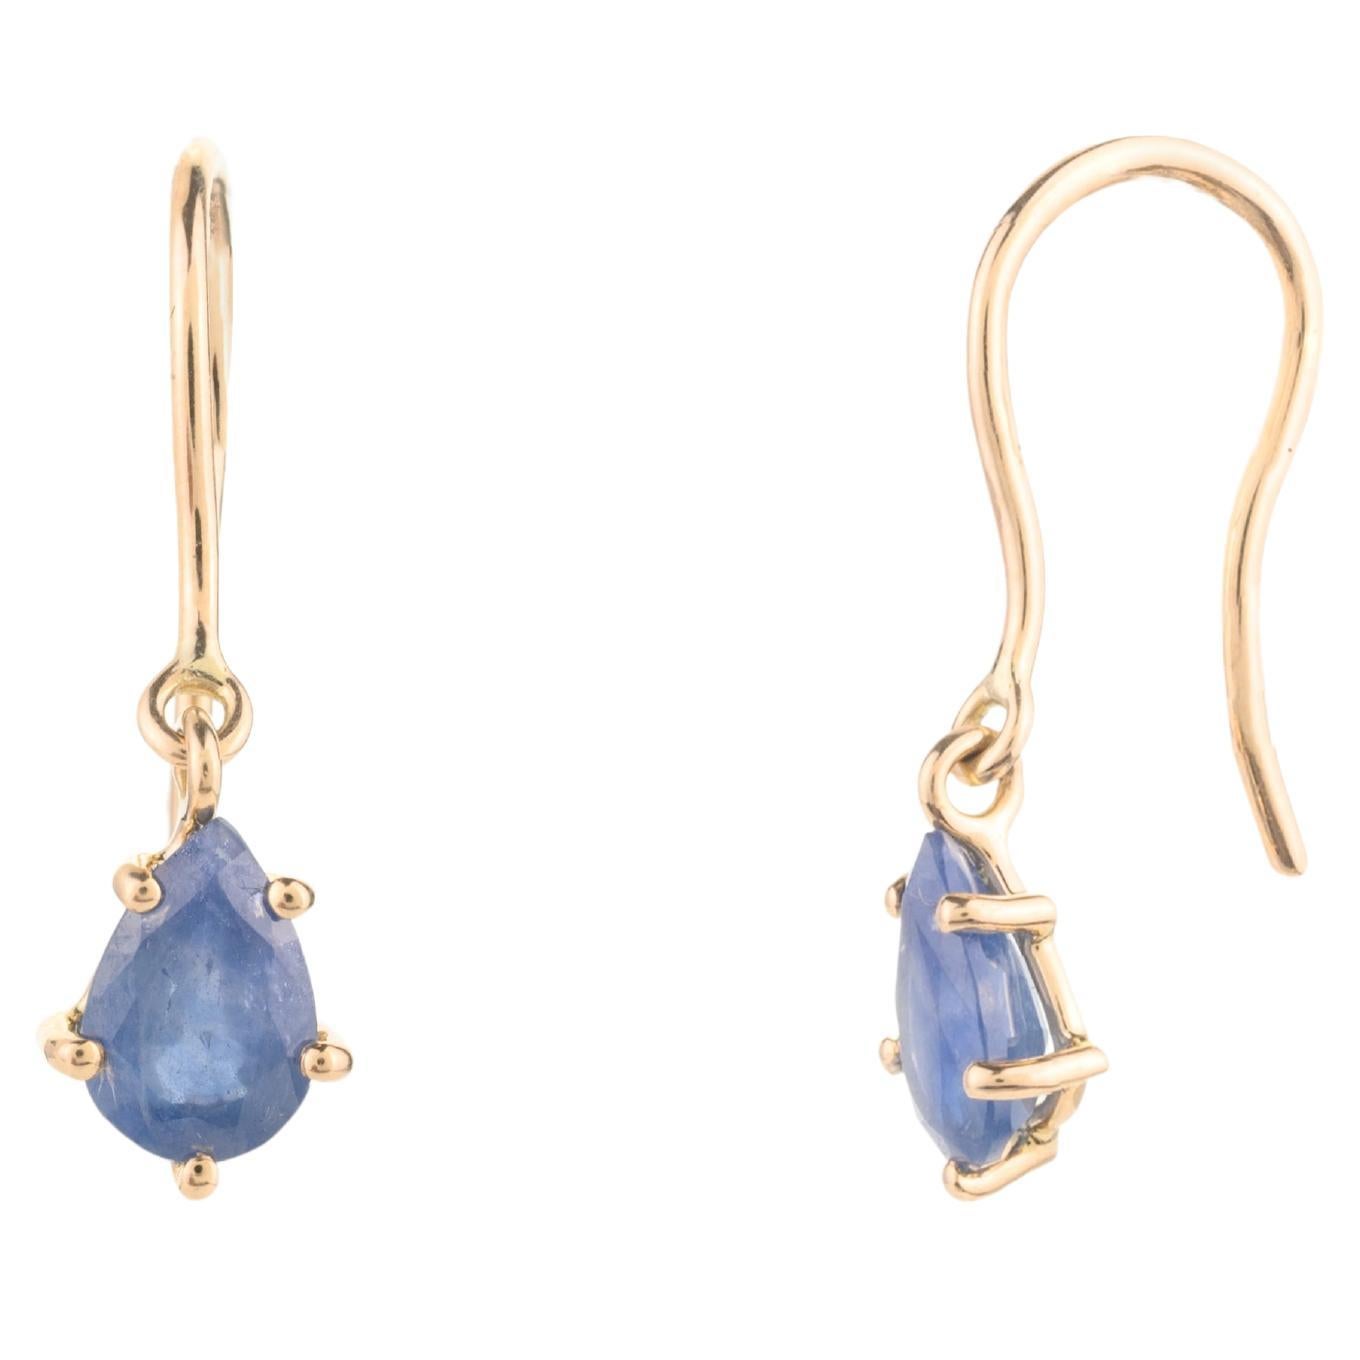 14k Solid Yellow Gold Minimalist Pear Cut Sapphire Dangle Earrings Gift for Her